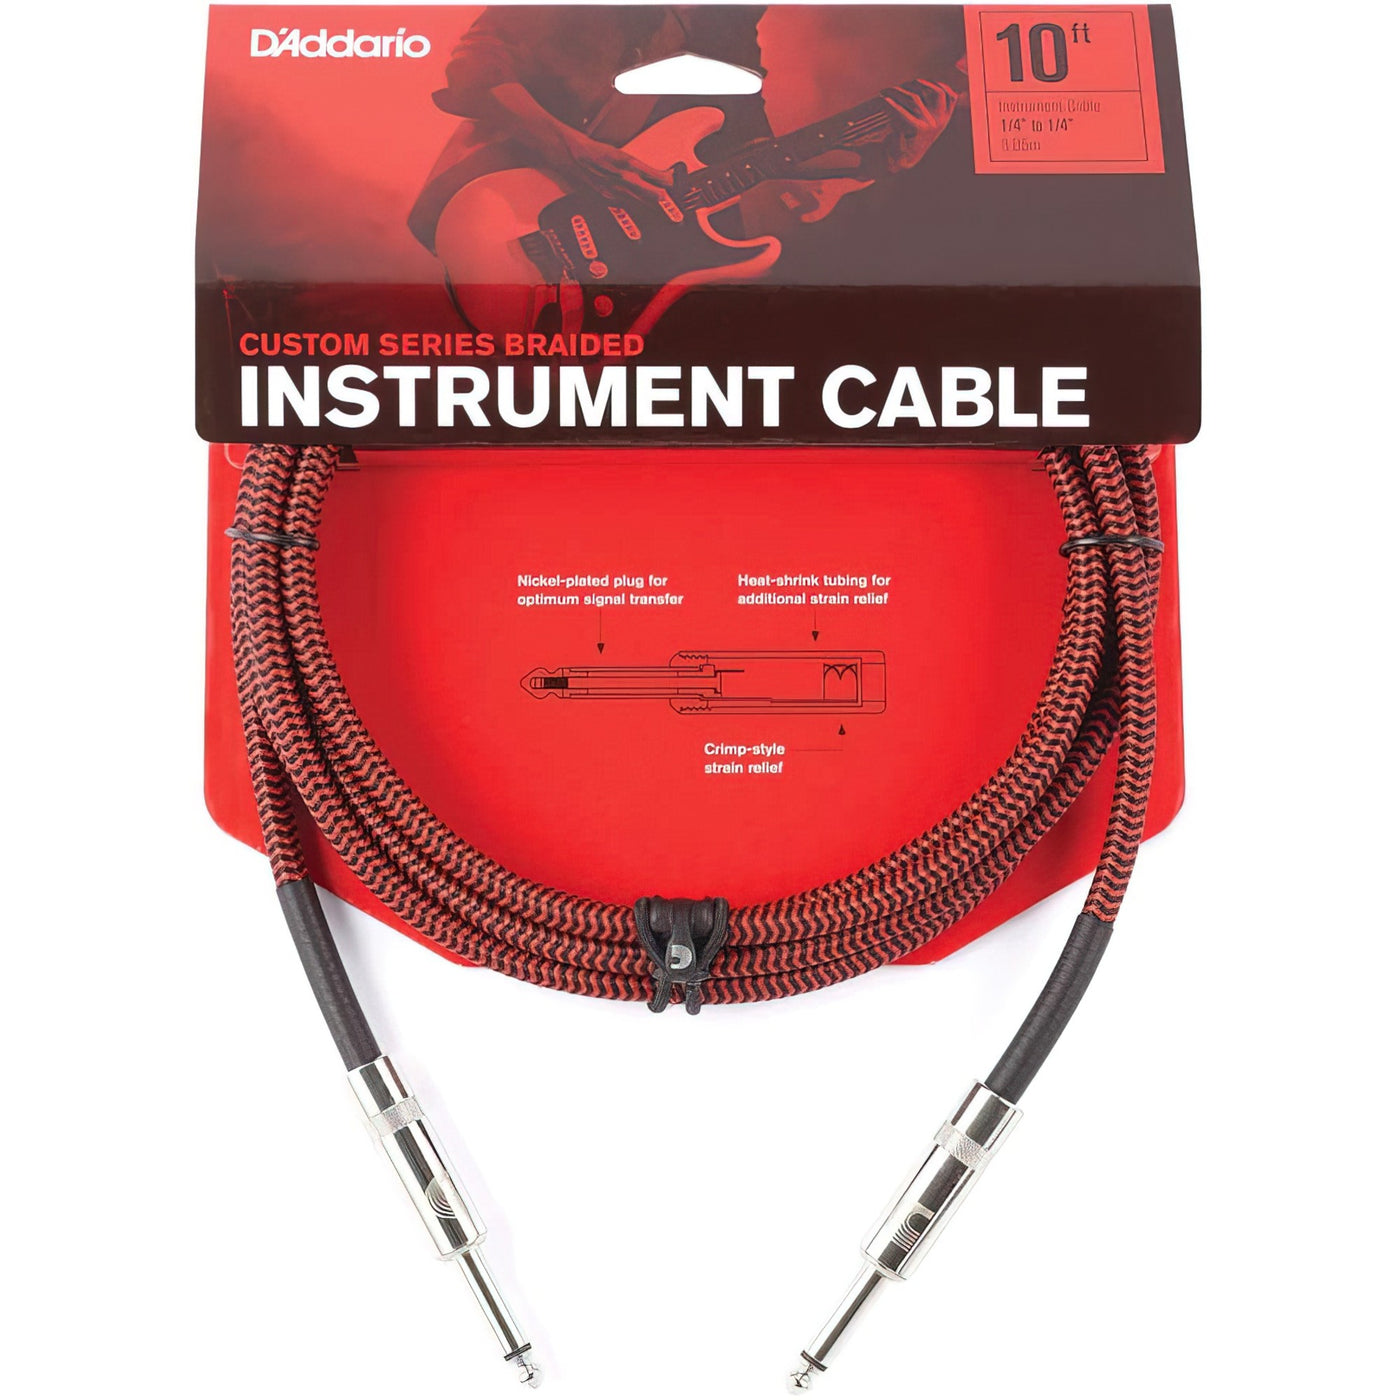 D'Addario Custom Series Braided Instrument Cable, Red, 10' (PW-BG-10RD)